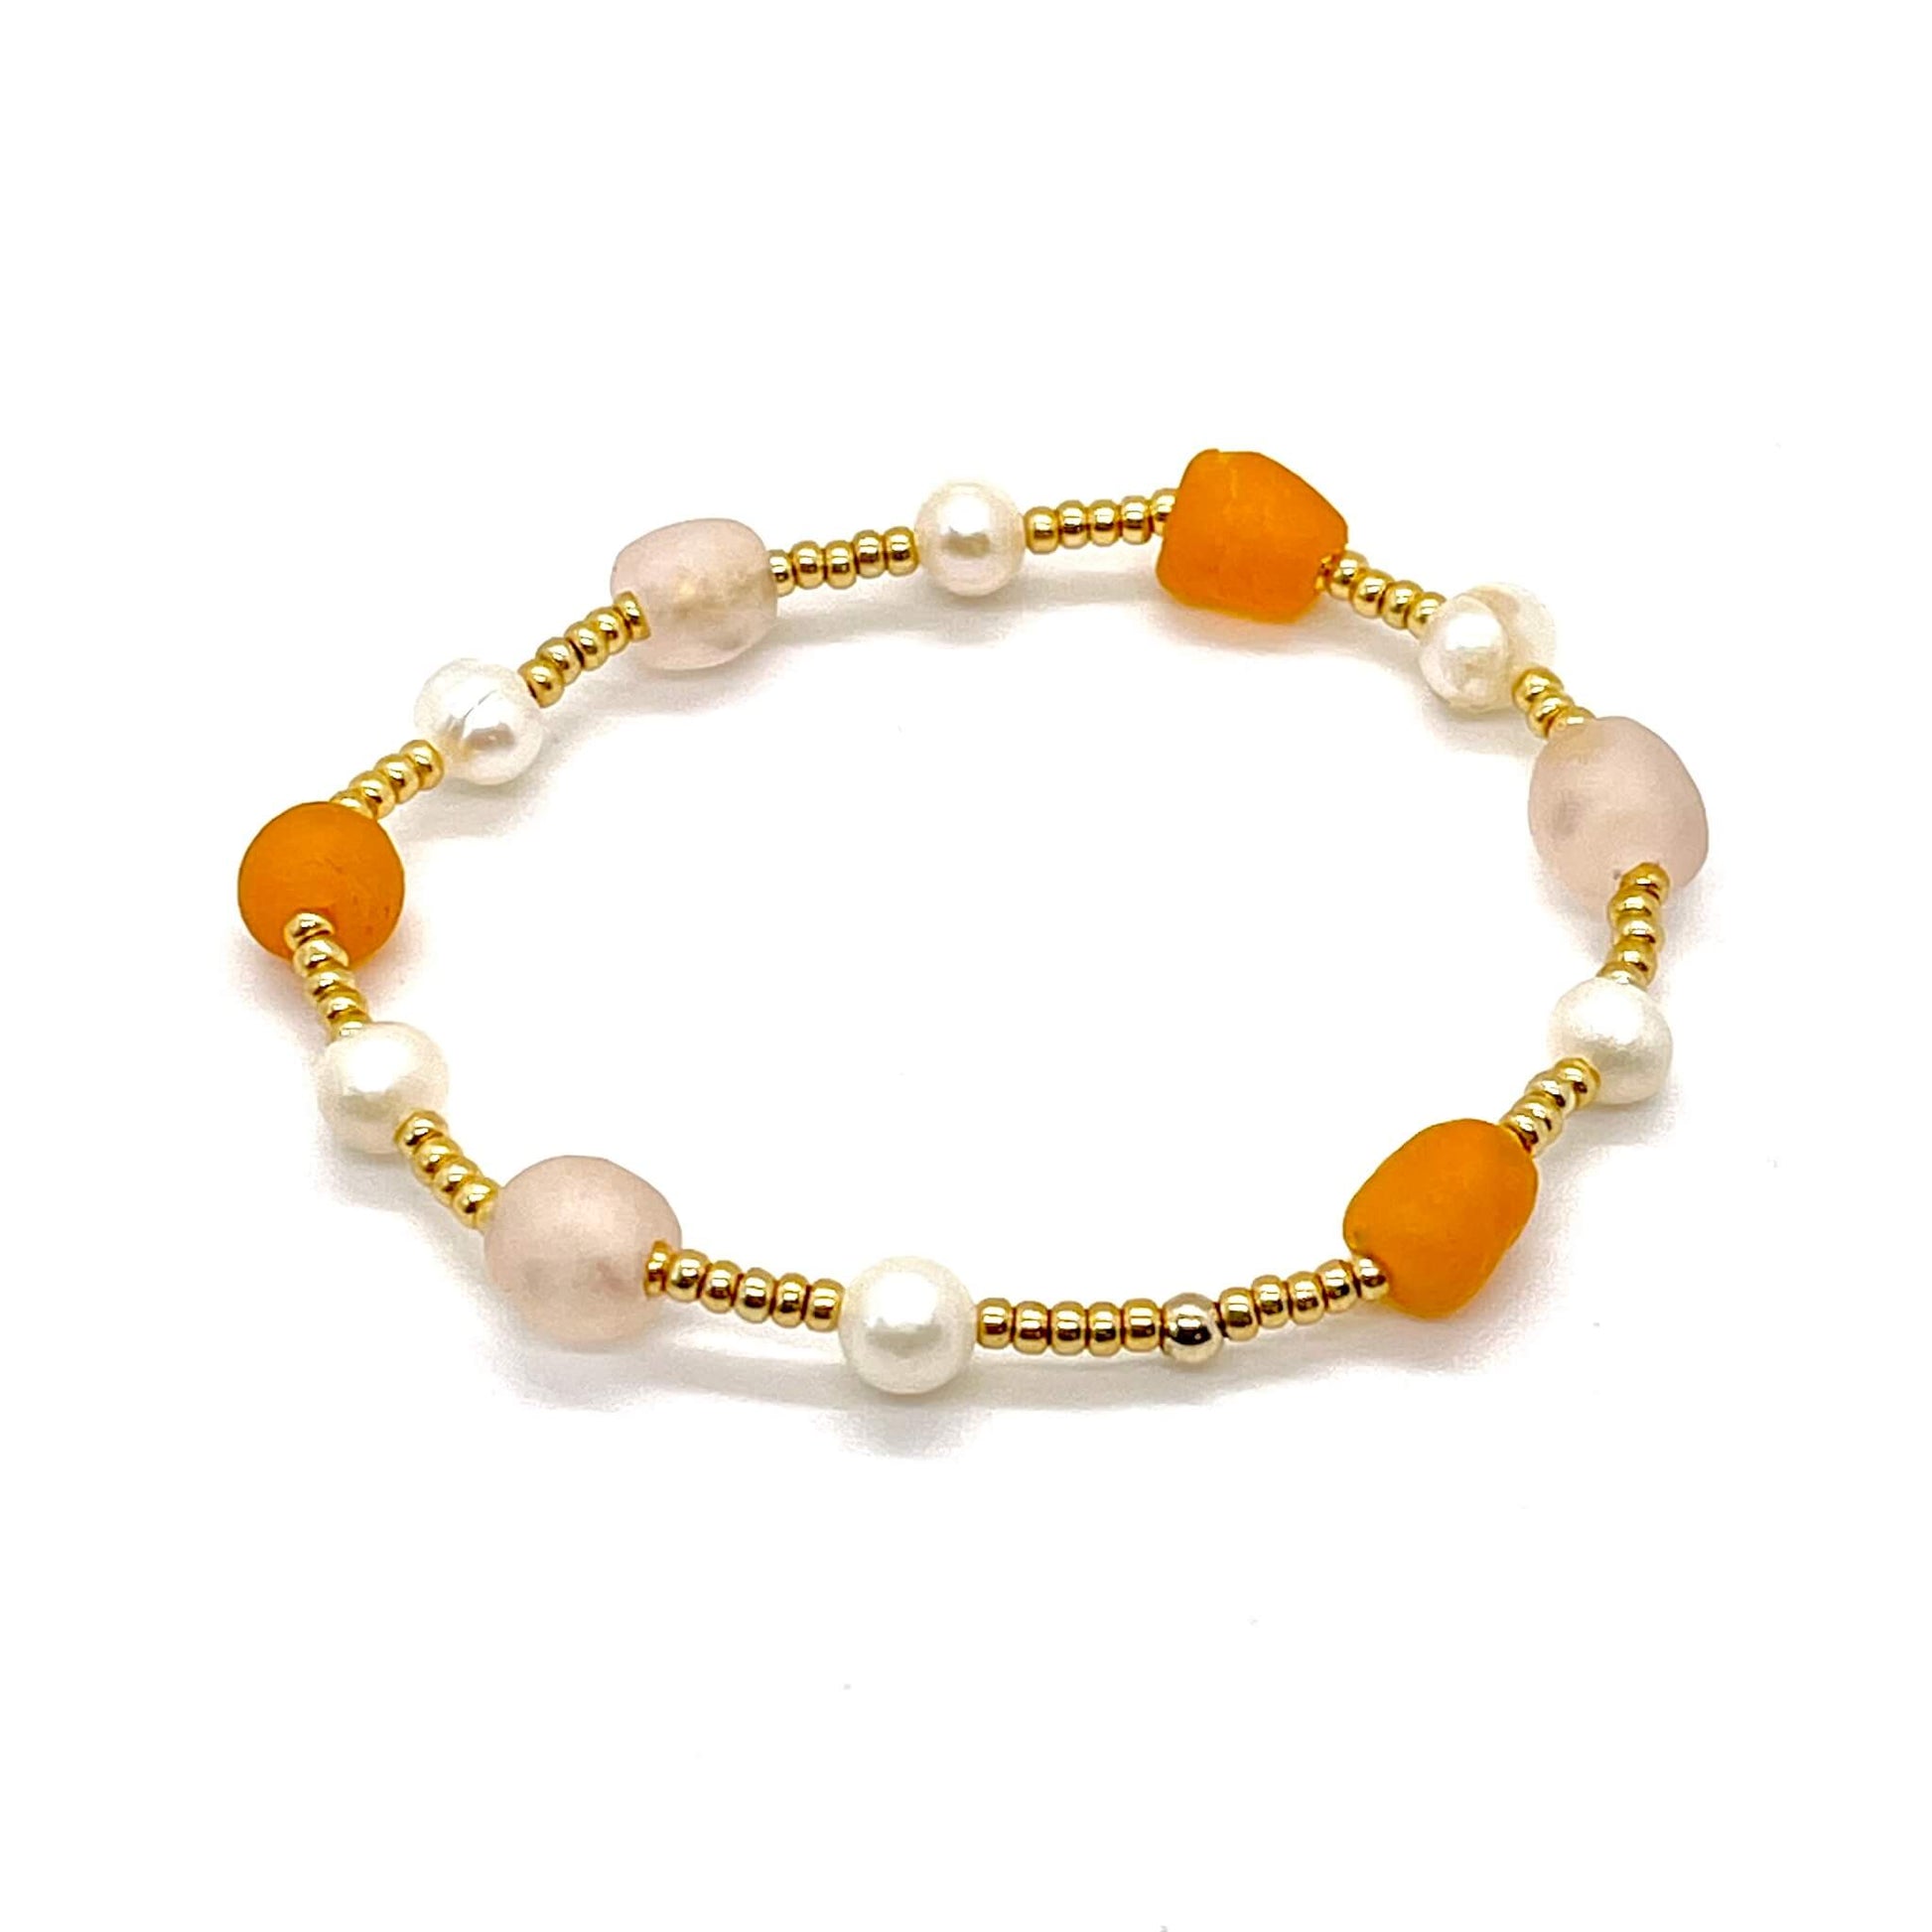 Beach glass bracelet with peach and orange sea glass, round freshwater pearls, and gold tone seed beads.